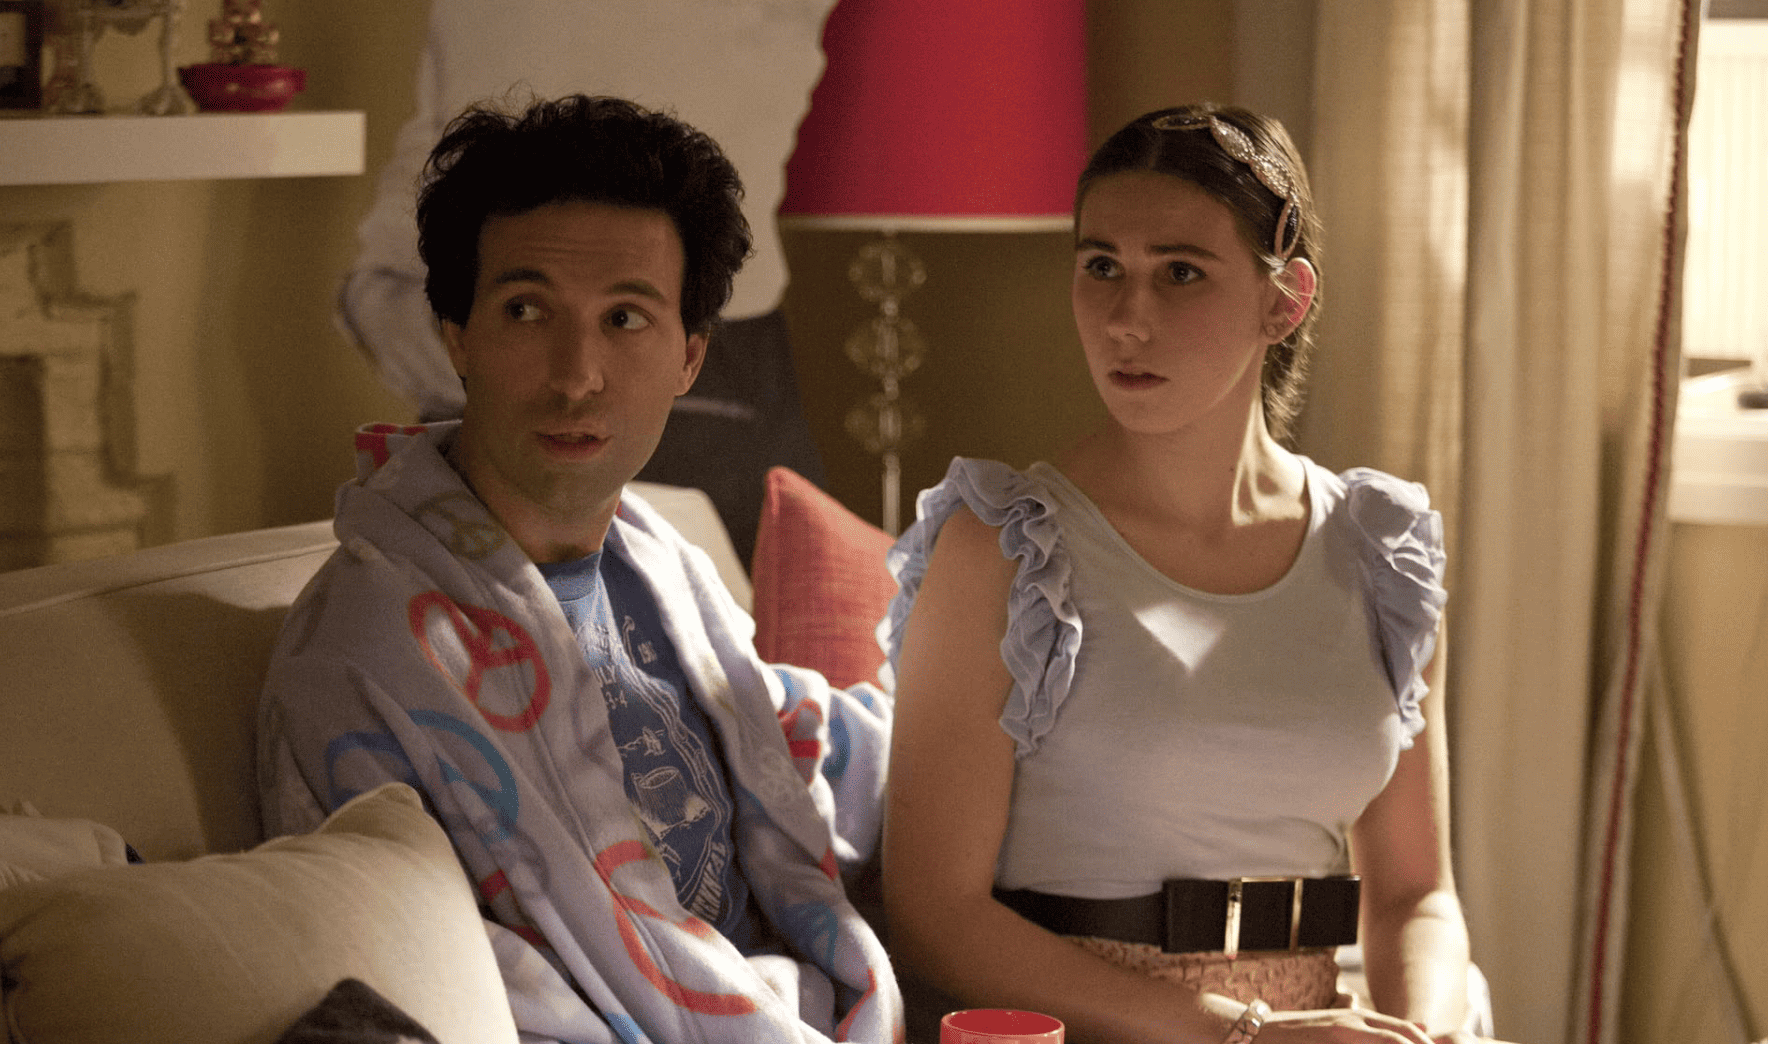 Shosh in her living room wearing a ruffled shirt and leopard-print skirt while her boyfriend Ray wears her peace-sign robe in this image from Apatow Productions